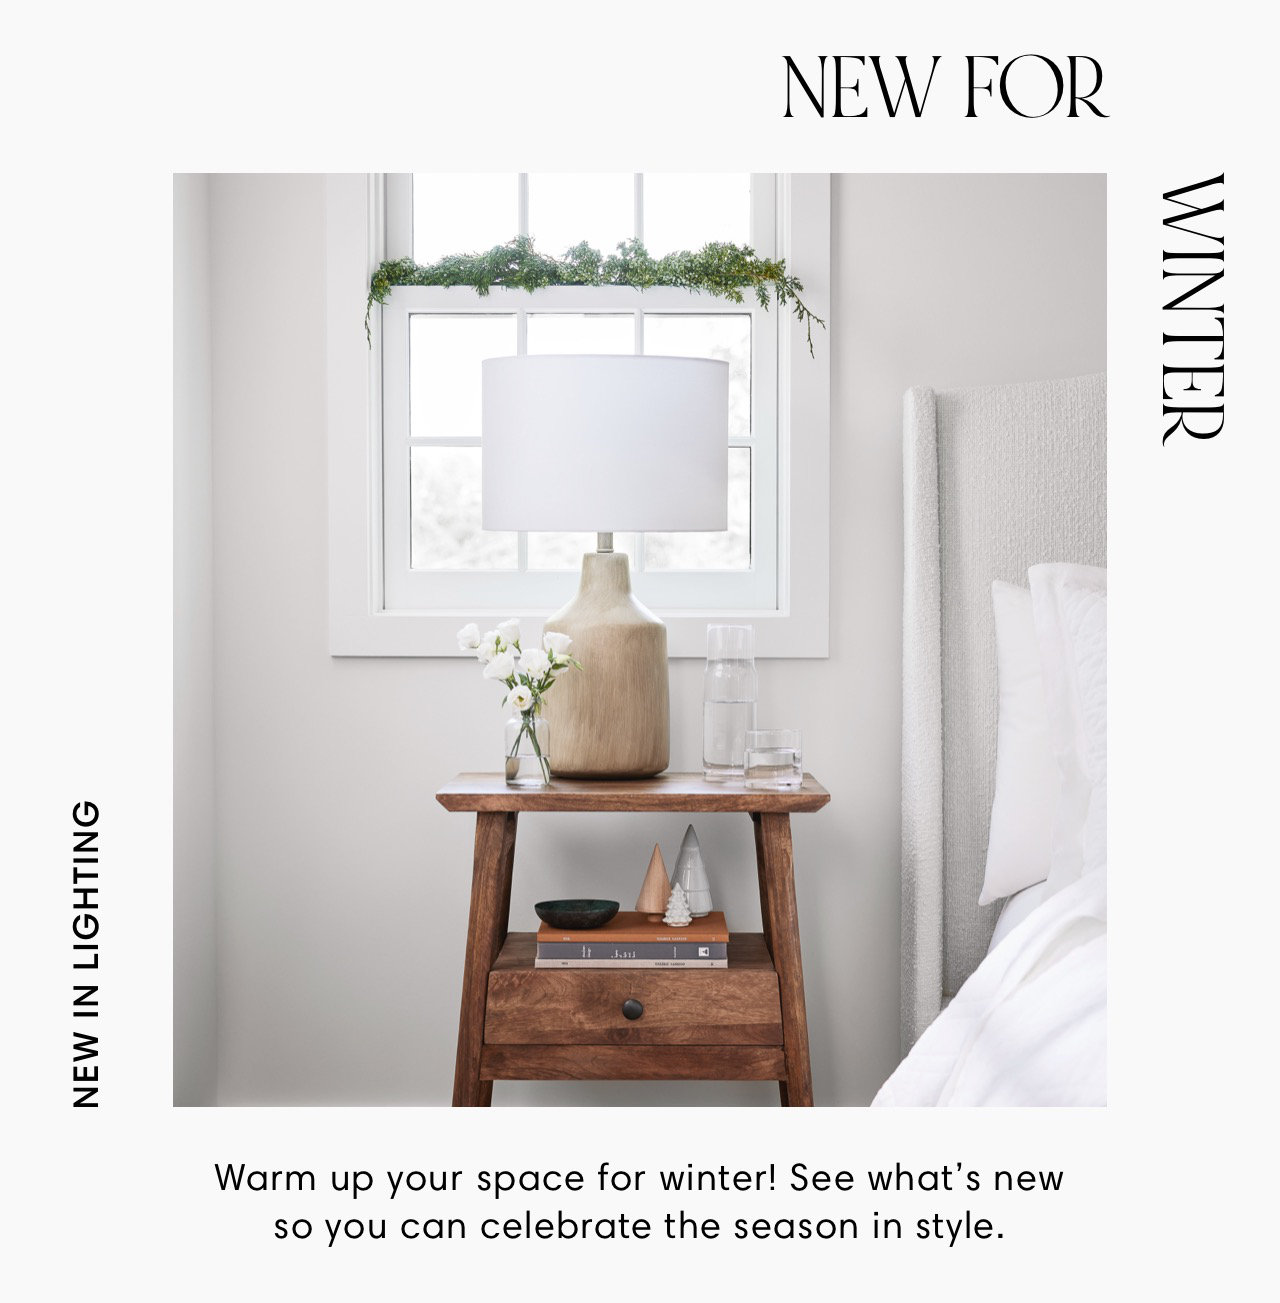 NEW IN LIGHTING NEW FOR Warm up your space for winter! See what's new so you can celebrate the season in style. AAINIA 